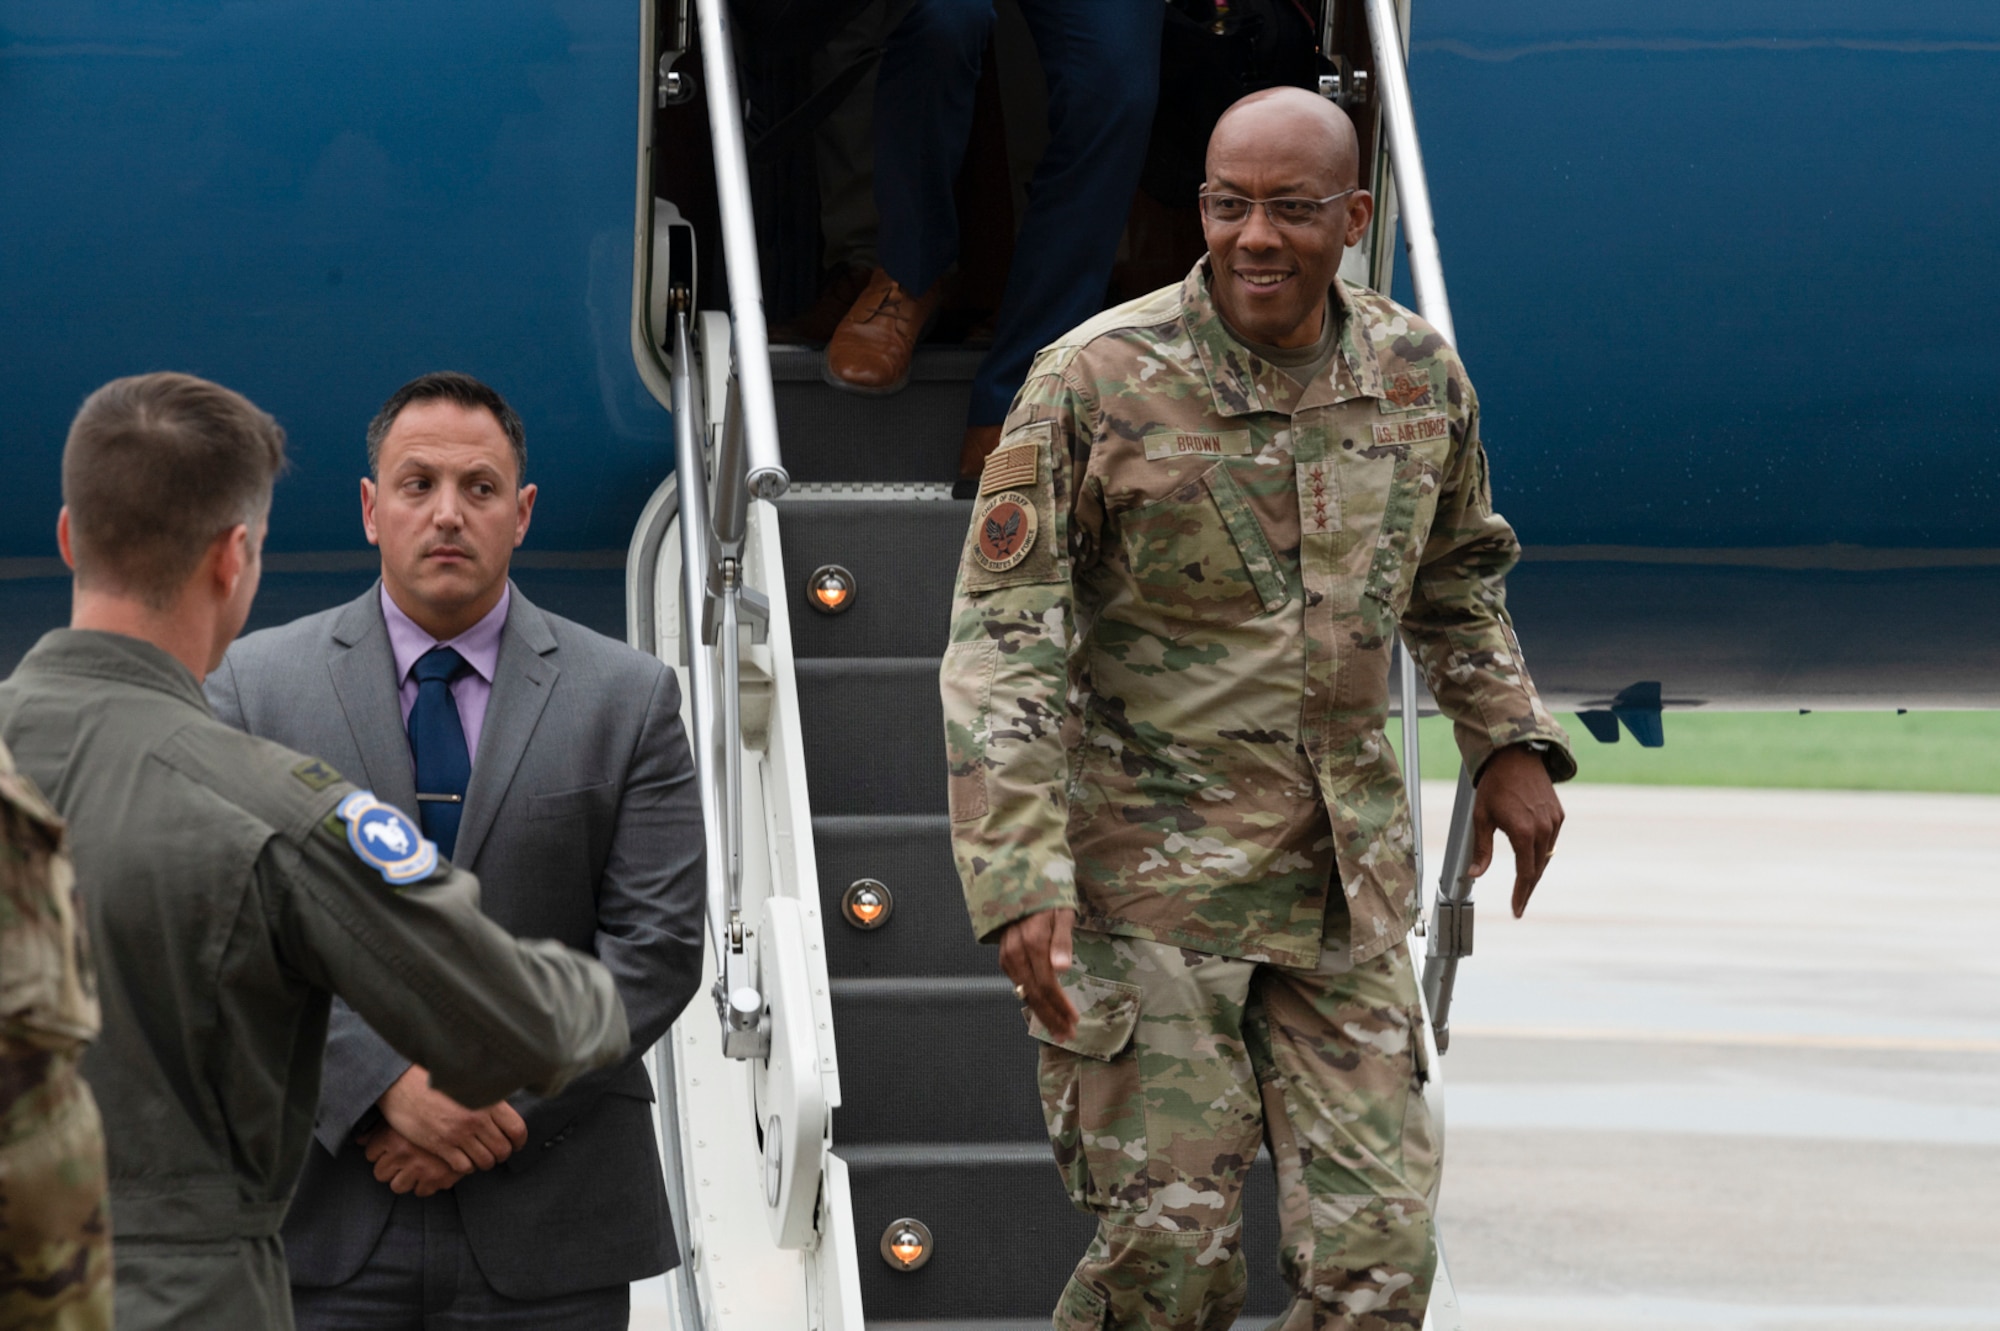 Air Force Chief of Staff Gen. CQ Brown, Jr. is greated by the 51st Fighter Wing Commander, Col. Joshua Wood, at Osan Air Base, Republic of Korea, Aug. 12, 2022.